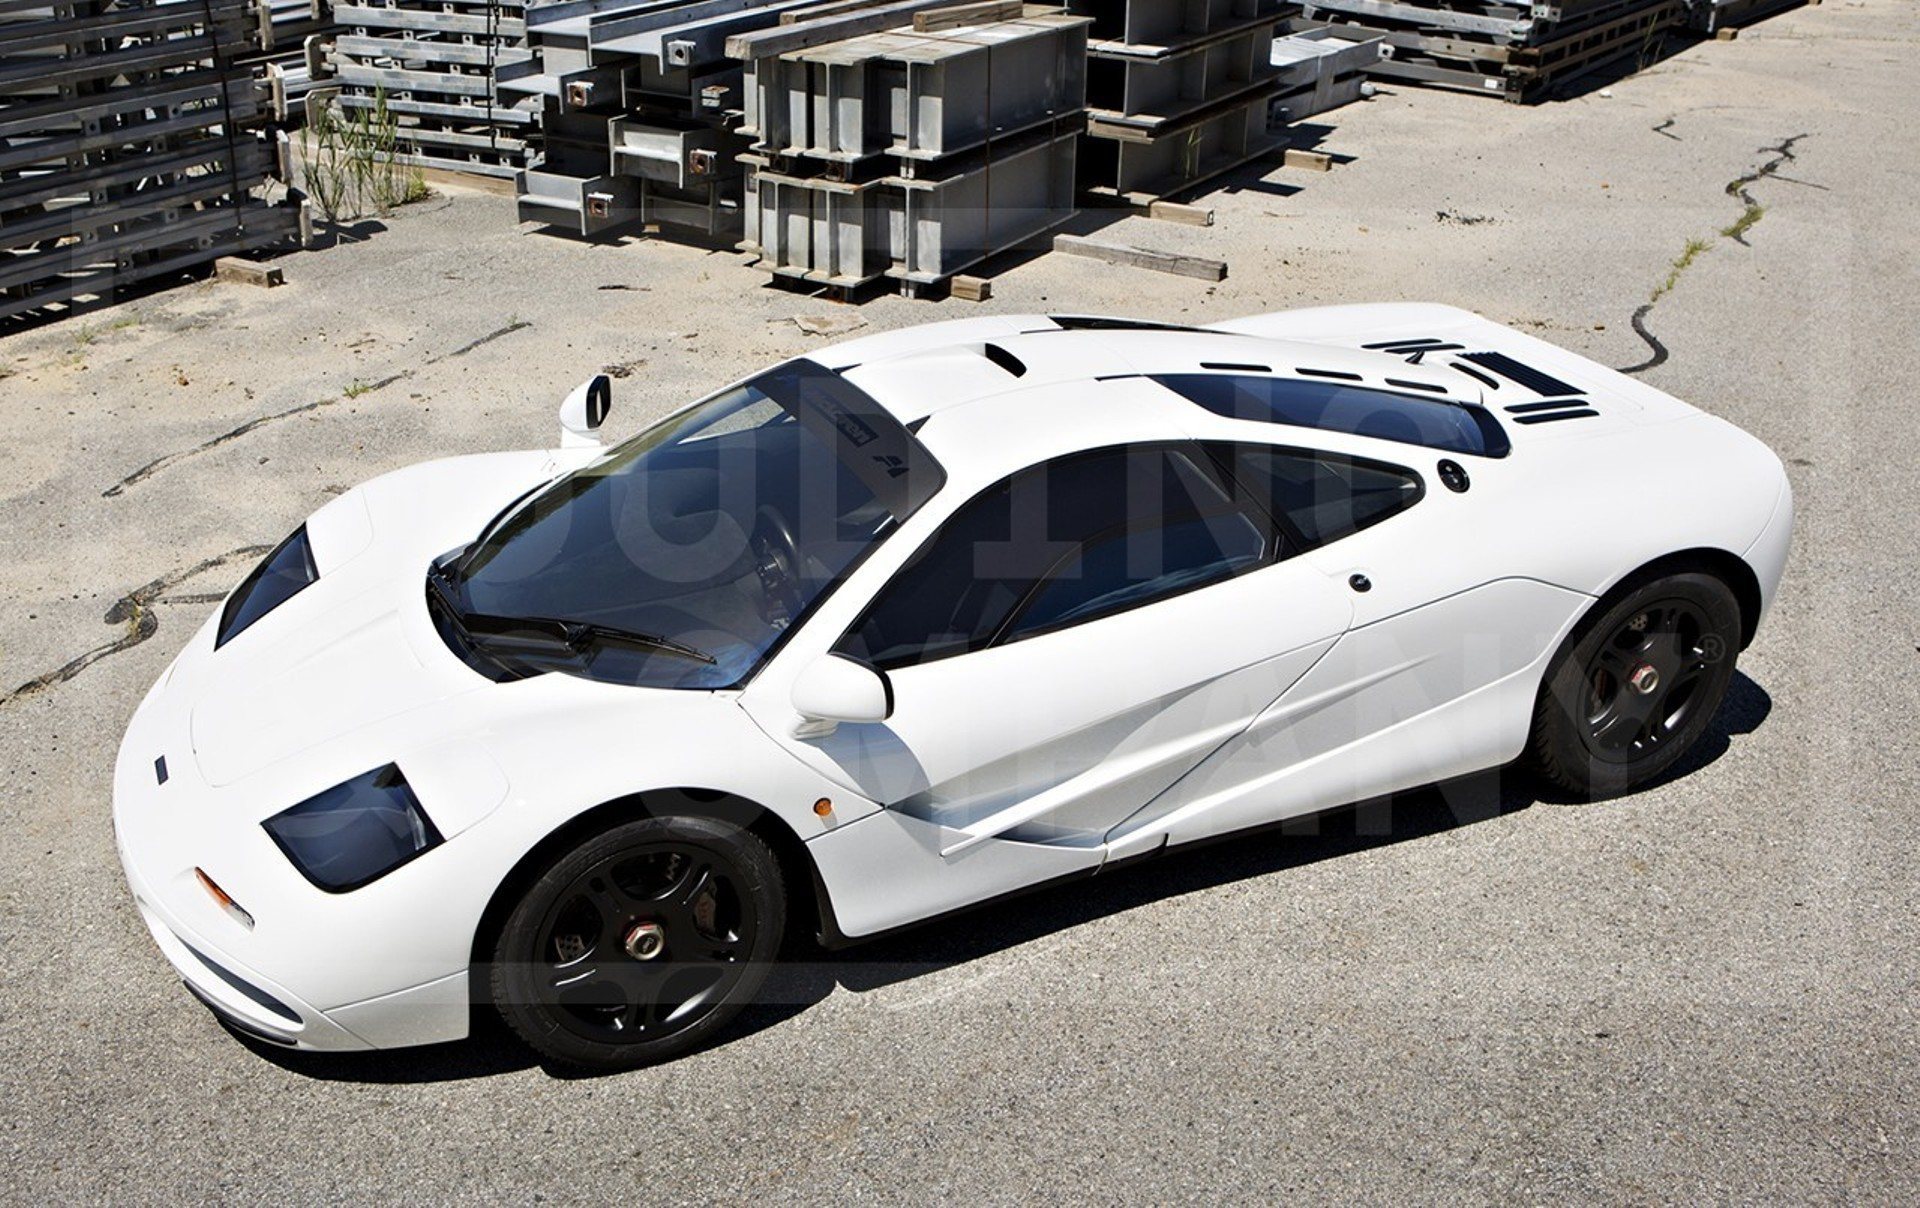 Gooding Pebble Beach 2014 Preview - 1995 McLaren F1 - The Only White F1 Ever Made ...1920 x 1208